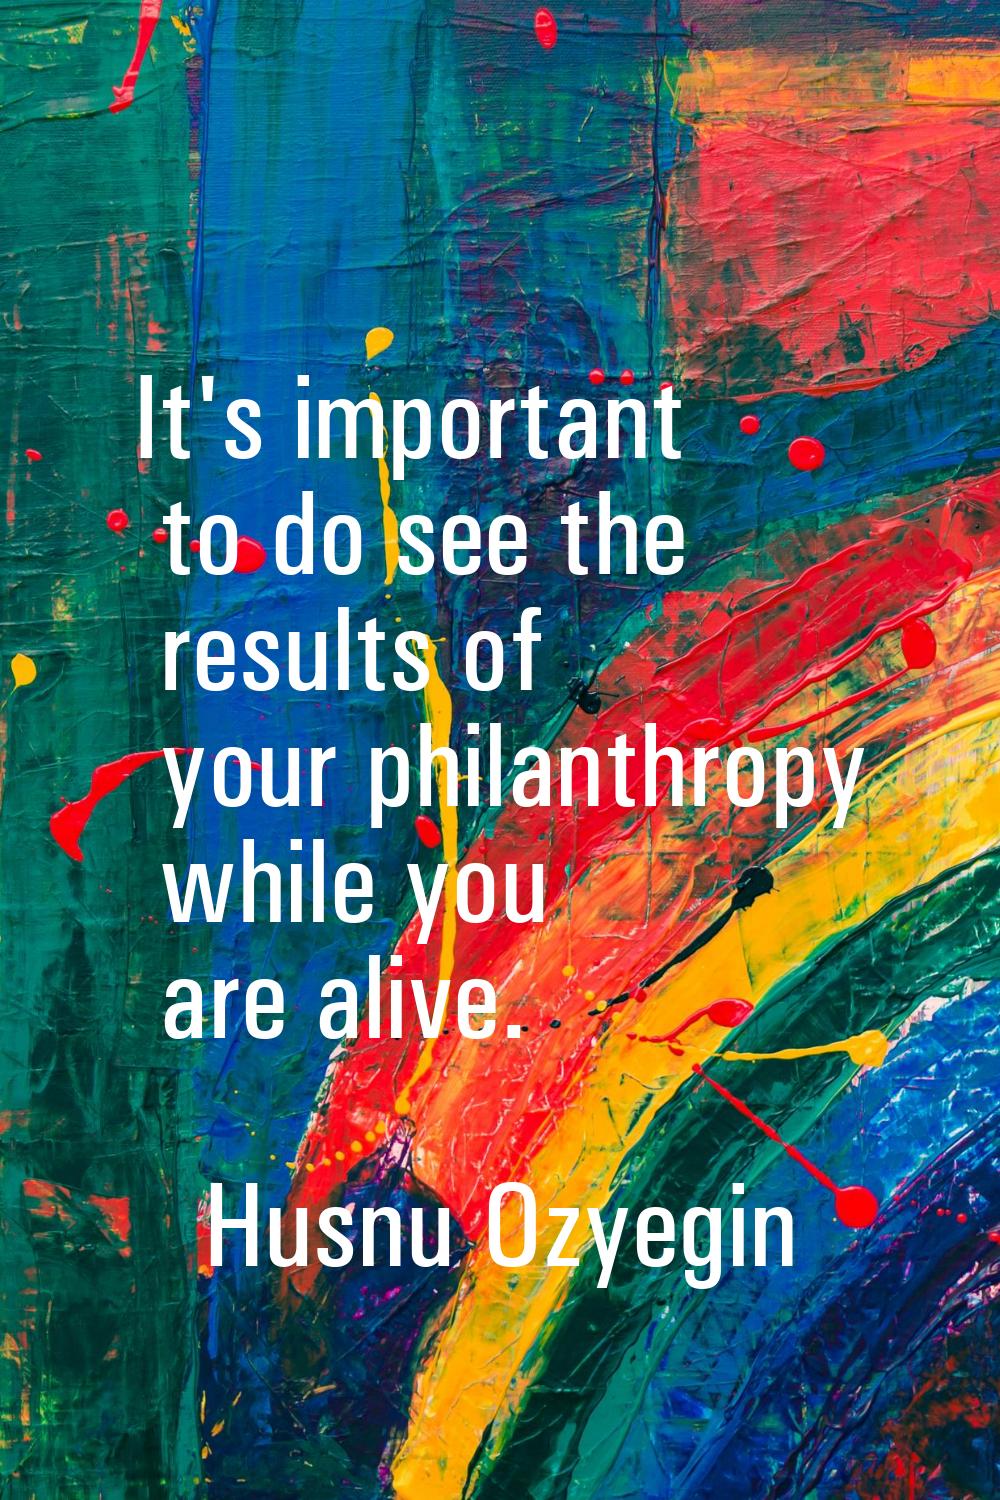 It's important to do see the results of your philanthropy while you are alive.